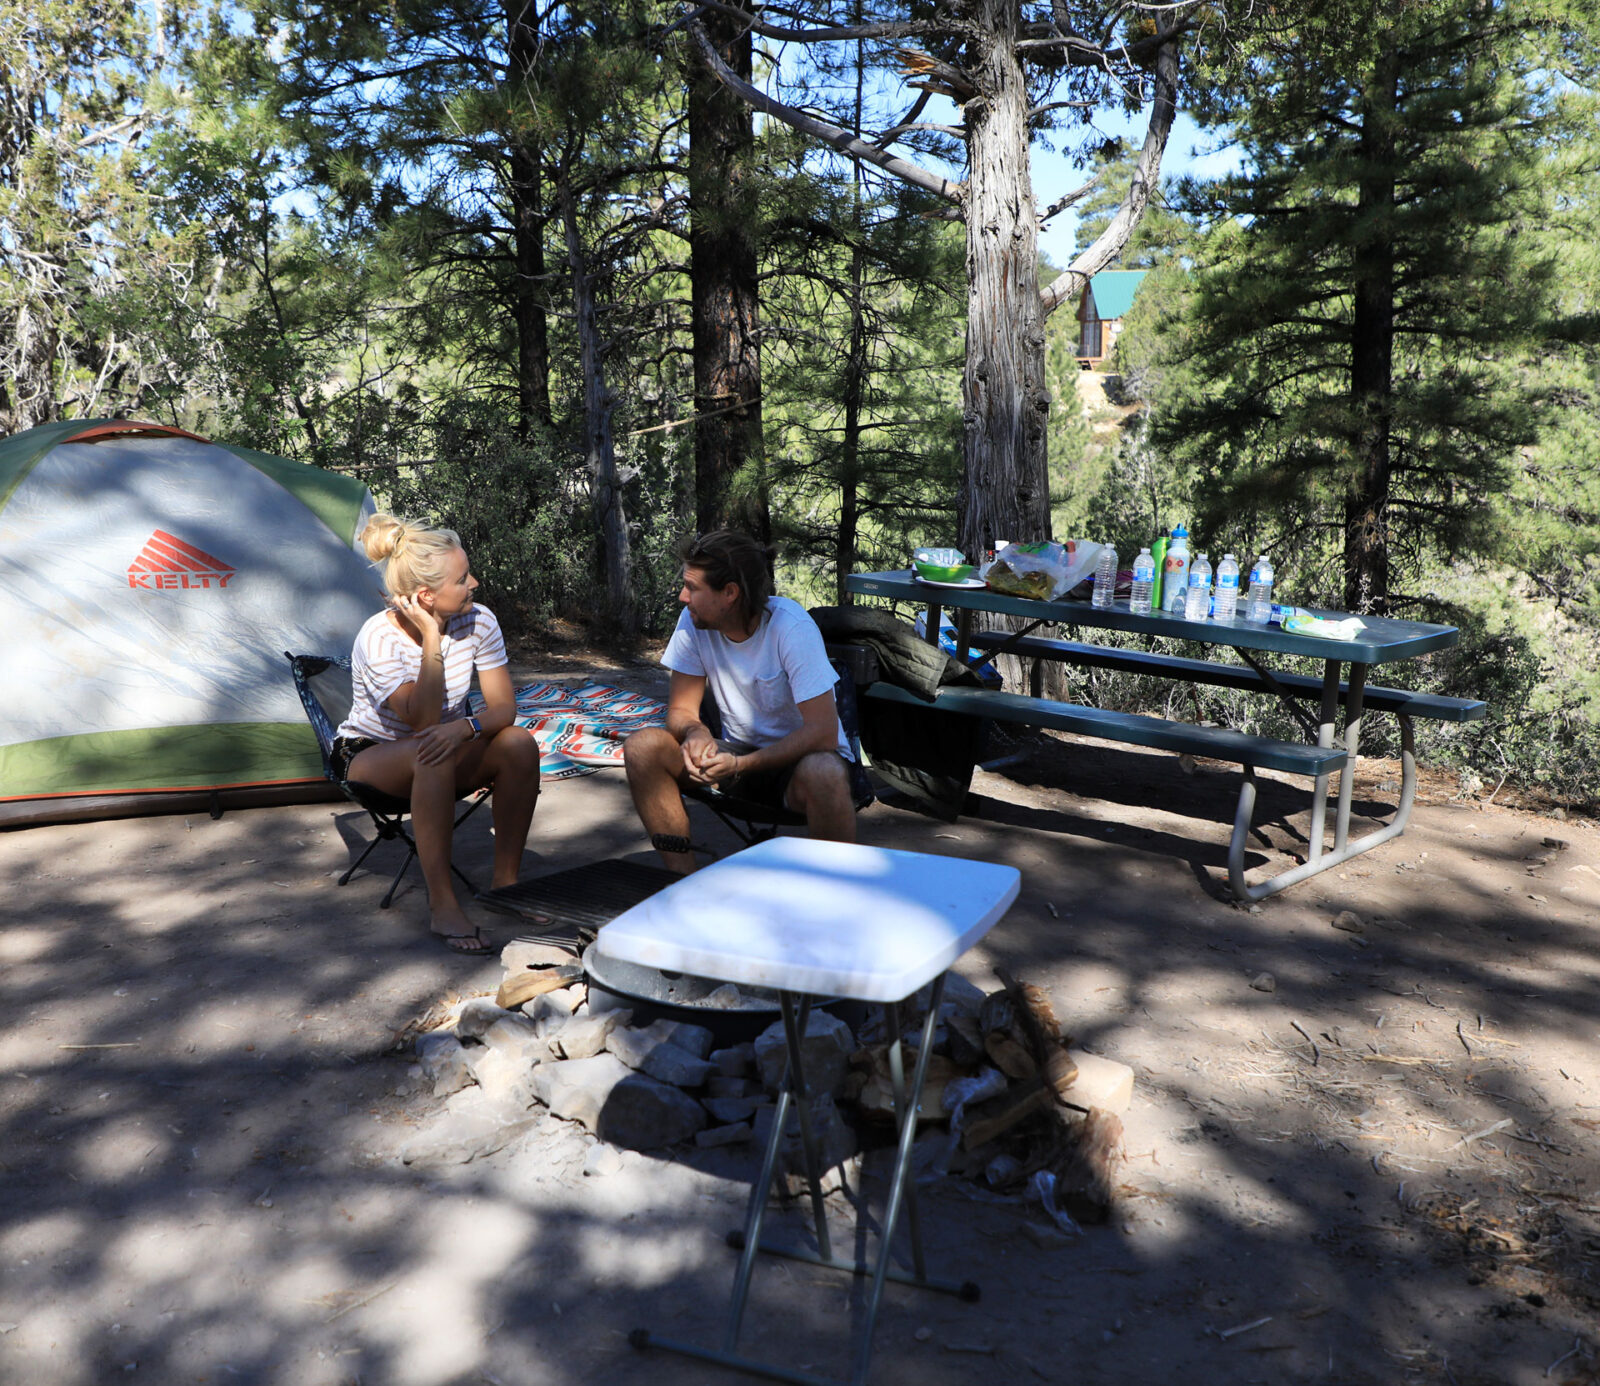 People camping at Zion Crest Campground in Utah